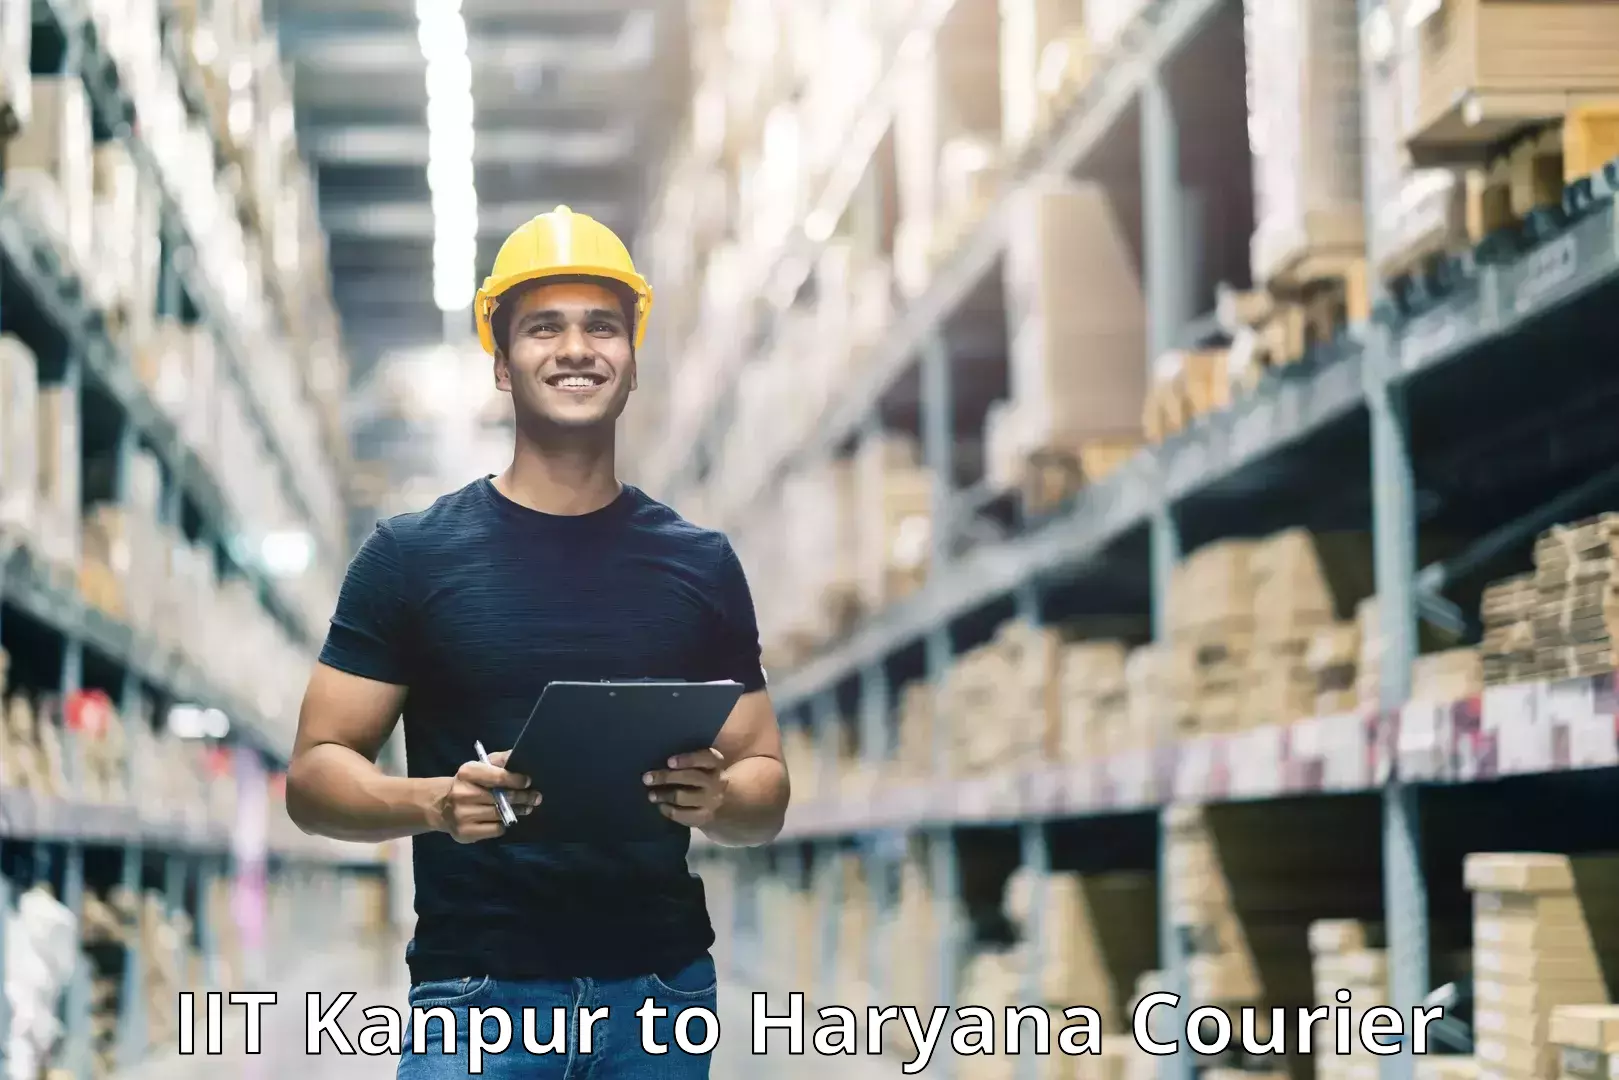 Courier service partnerships IIT Kanpur to Chaudhary Charan Singh Haryana Agricultural University Hisar